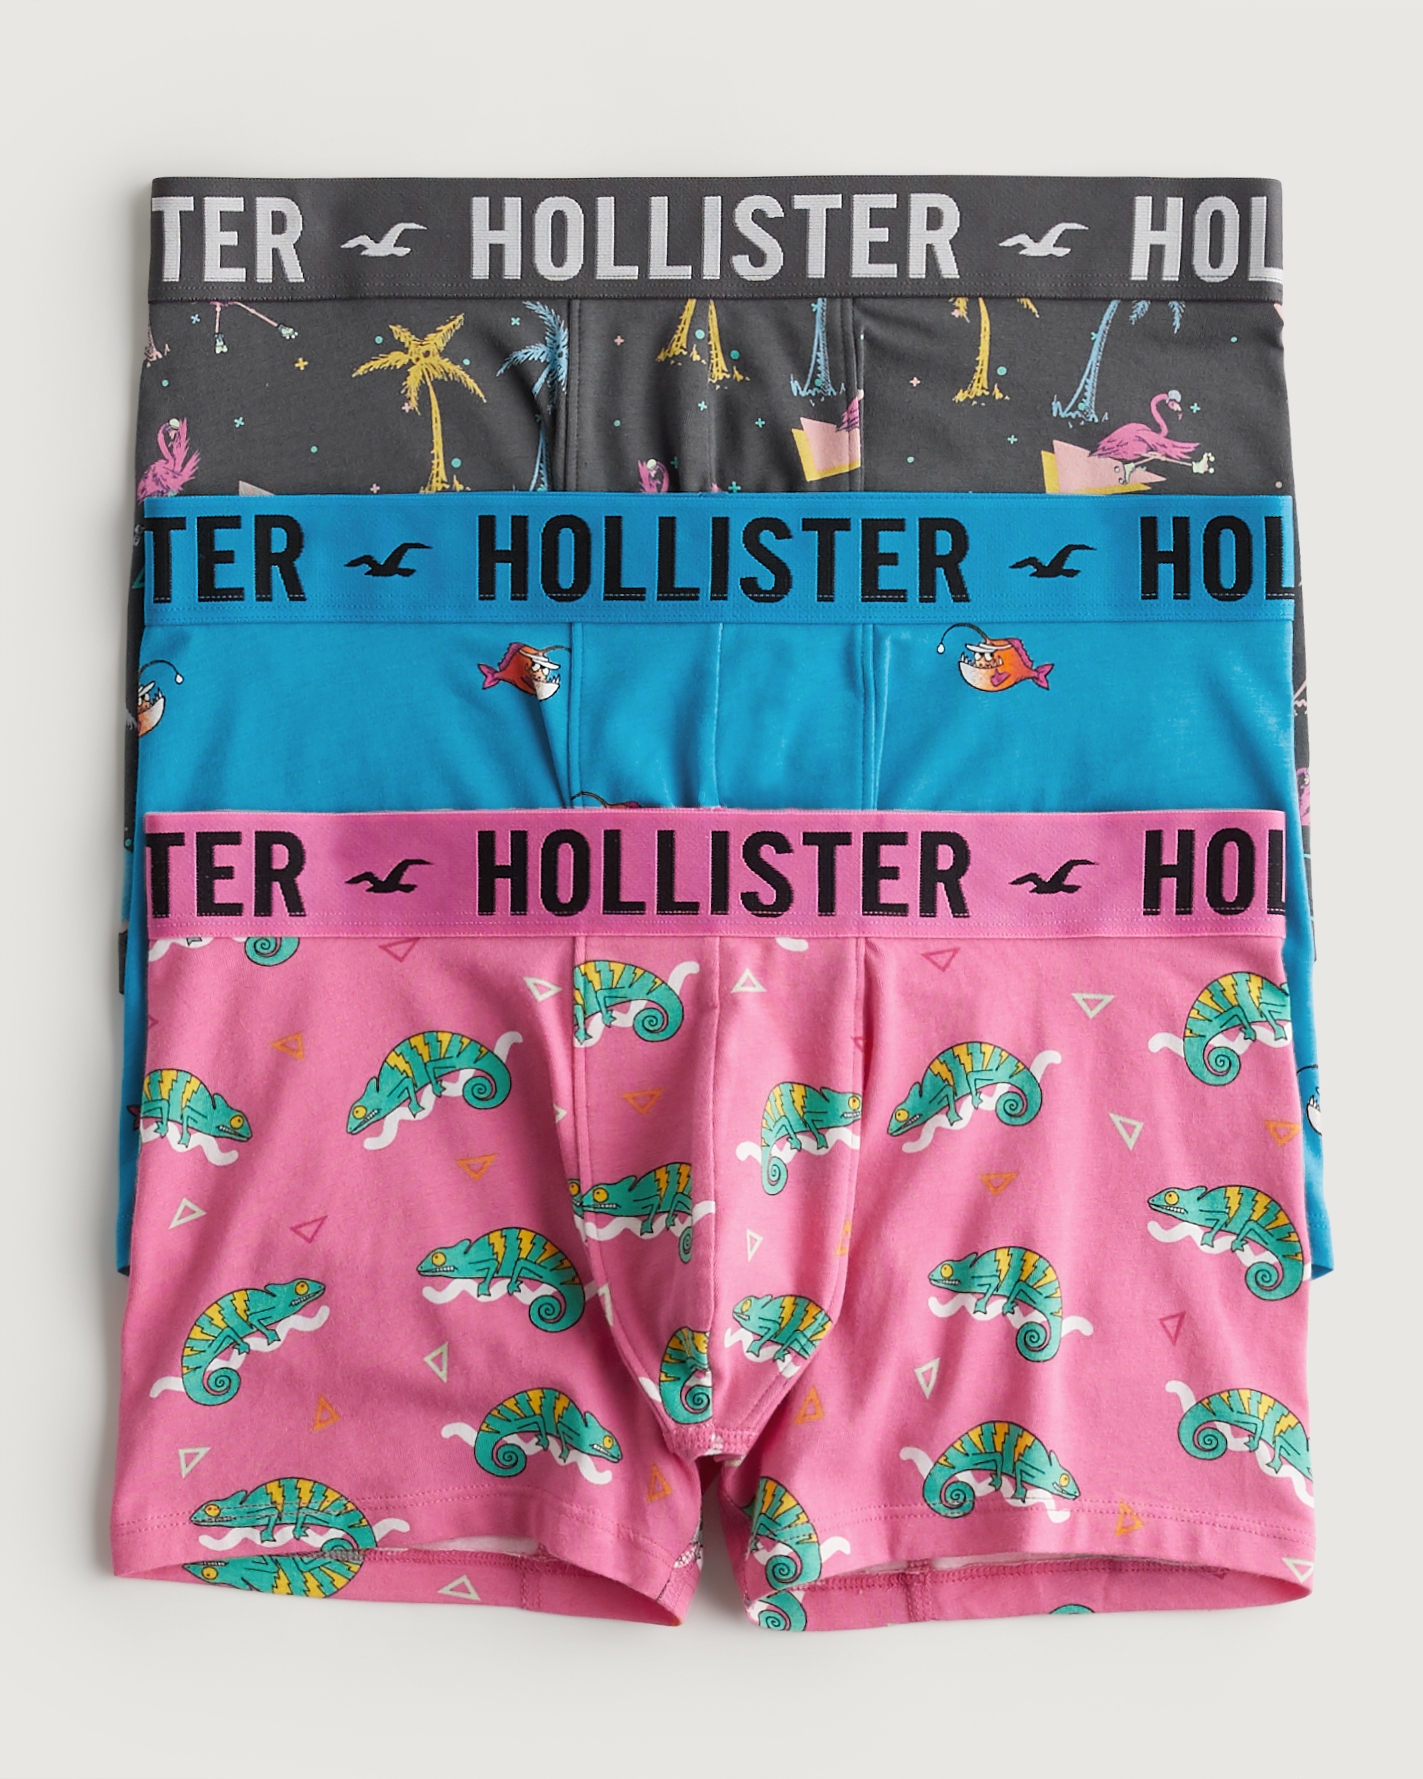 https://img.hollisterco.com/is/image/anf/KIC_314-3301-0890-608_prod1.jpg?policy=product-extra-large